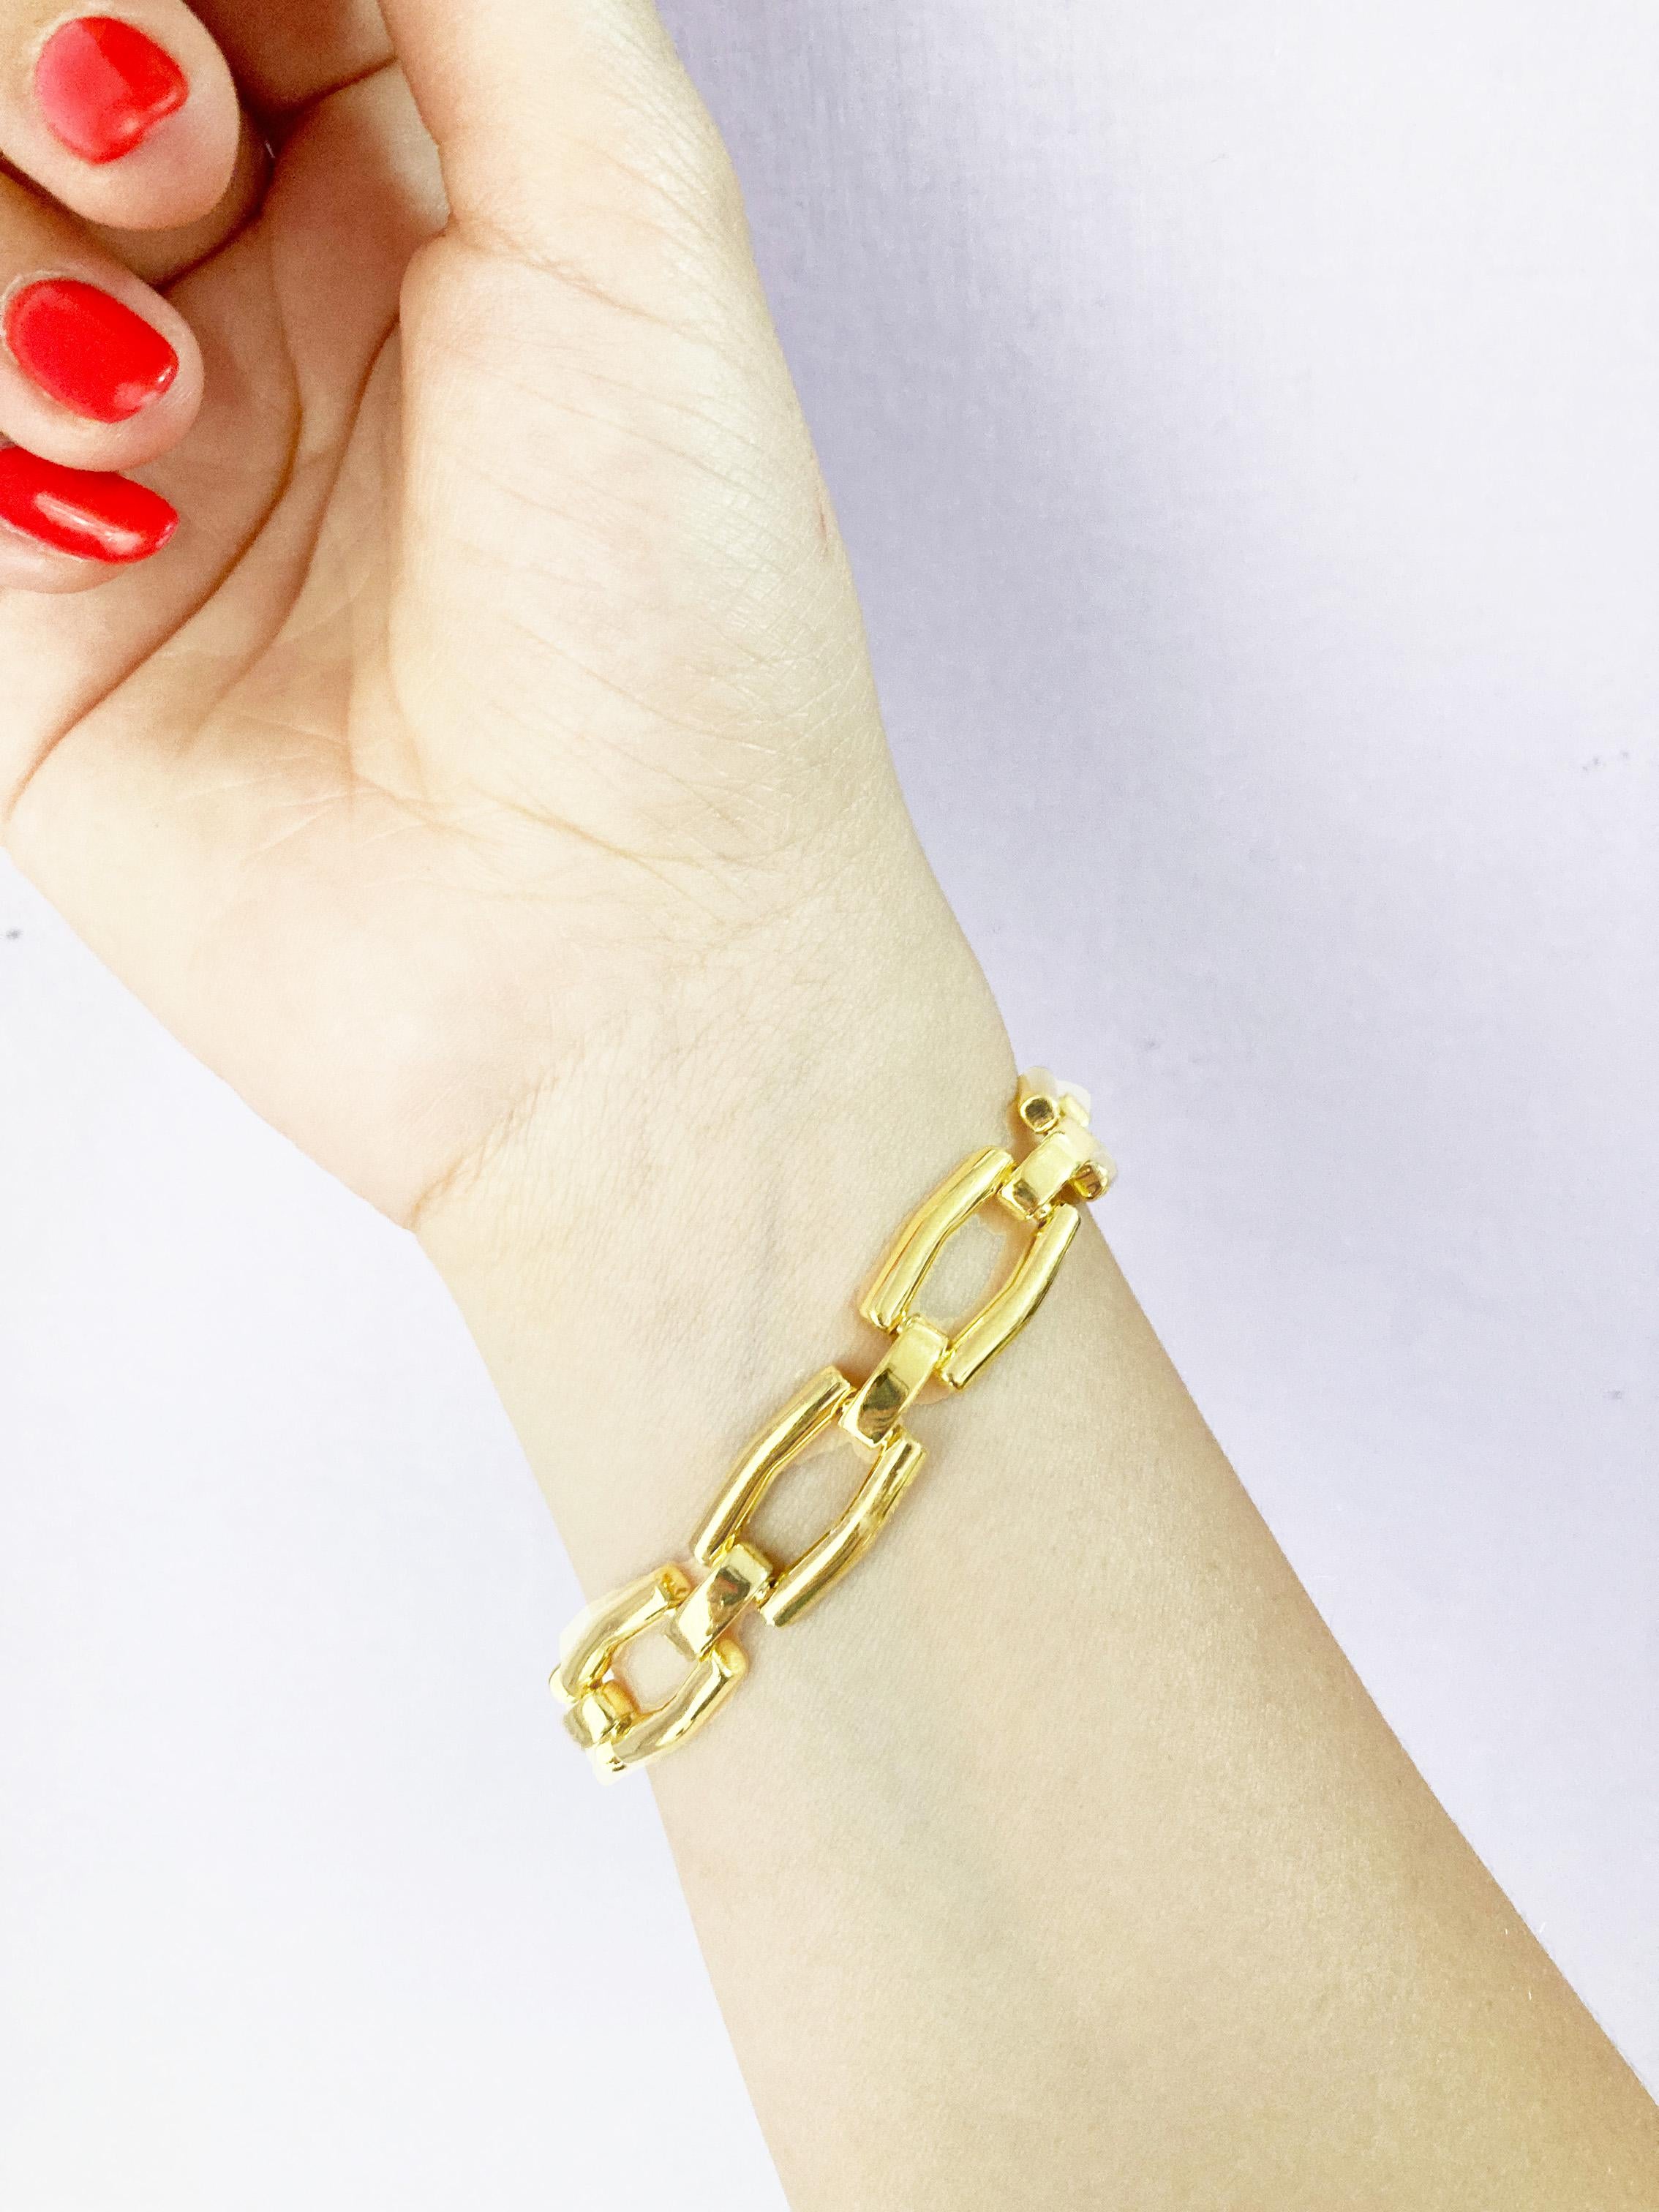 Modern Rossella Ugolini 24K Yellow Gold Plated Unique Links Chain Bracelet For Sale